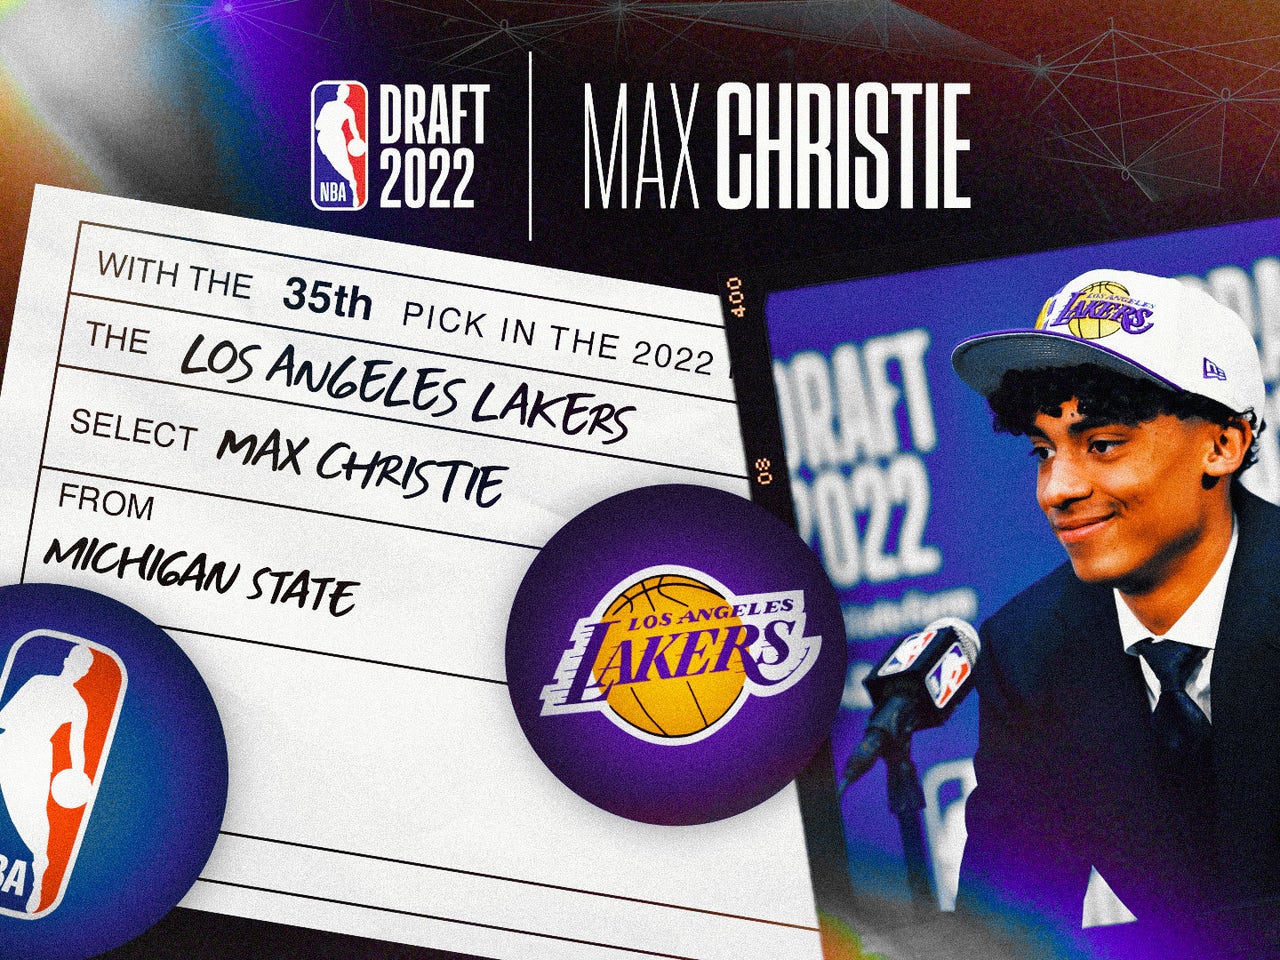 NBA Draft 2022: What Lakers are getting in Max Christie